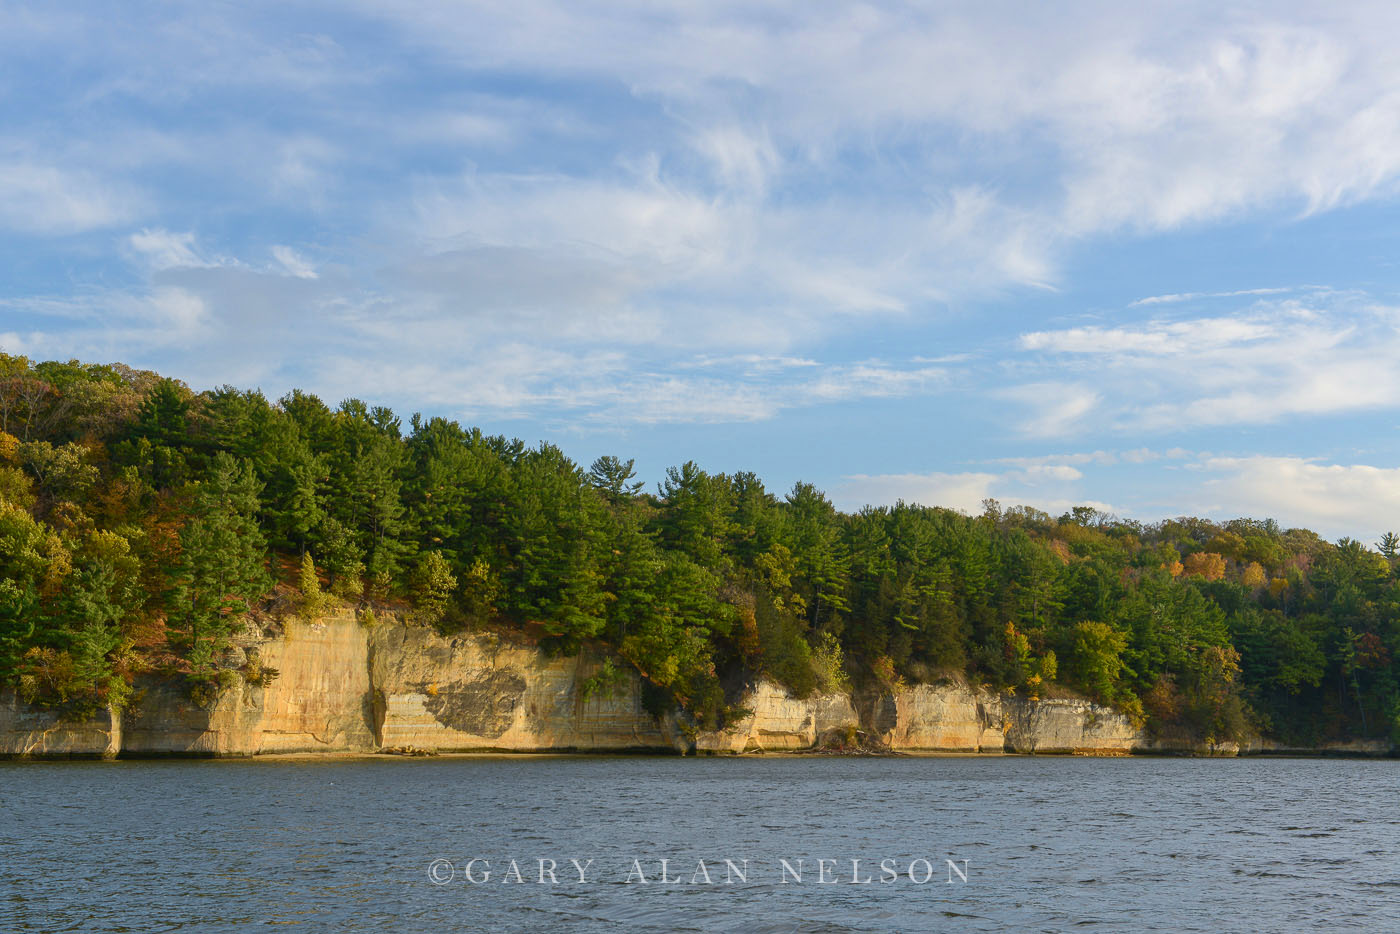 Chalk cliffs on the Cannon River, Minnesota